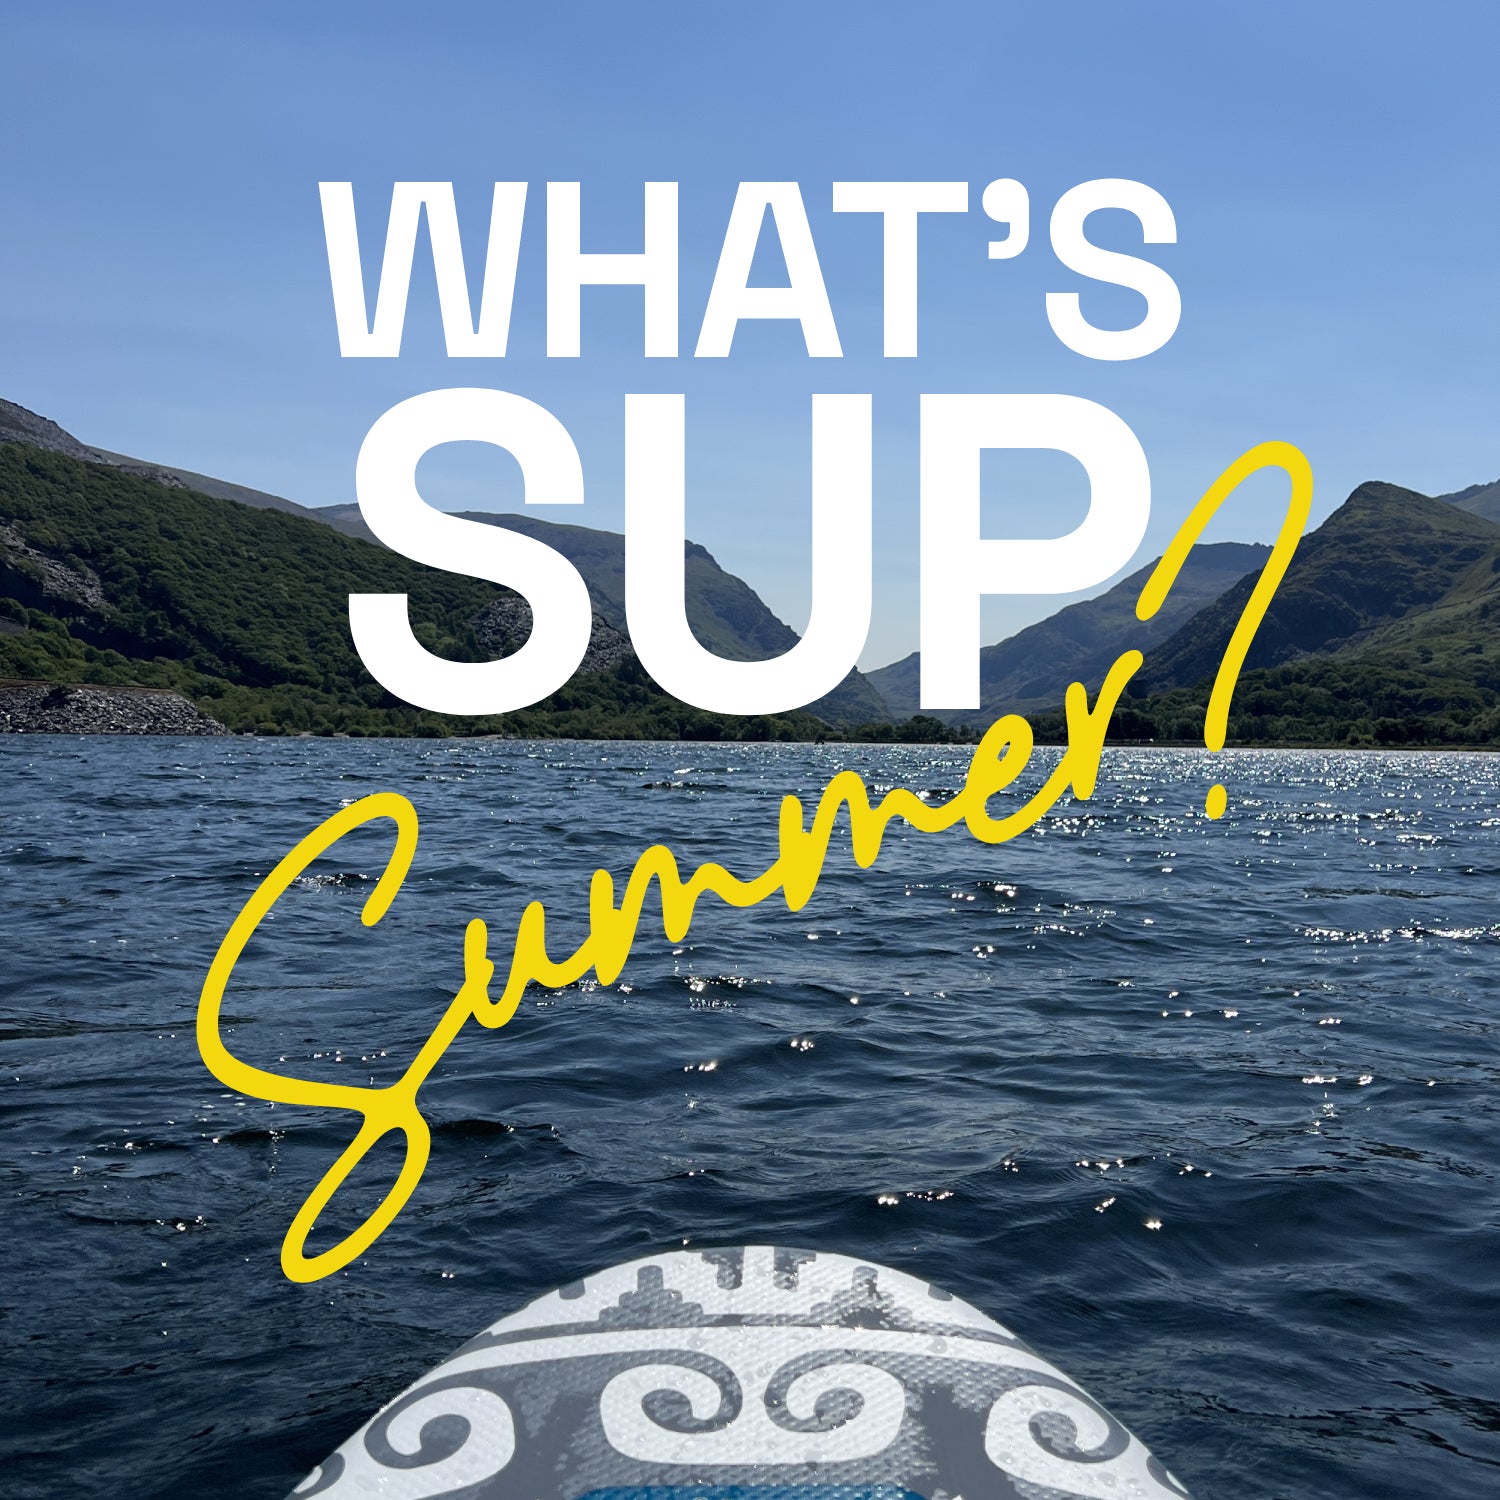 What's SUP Summer?